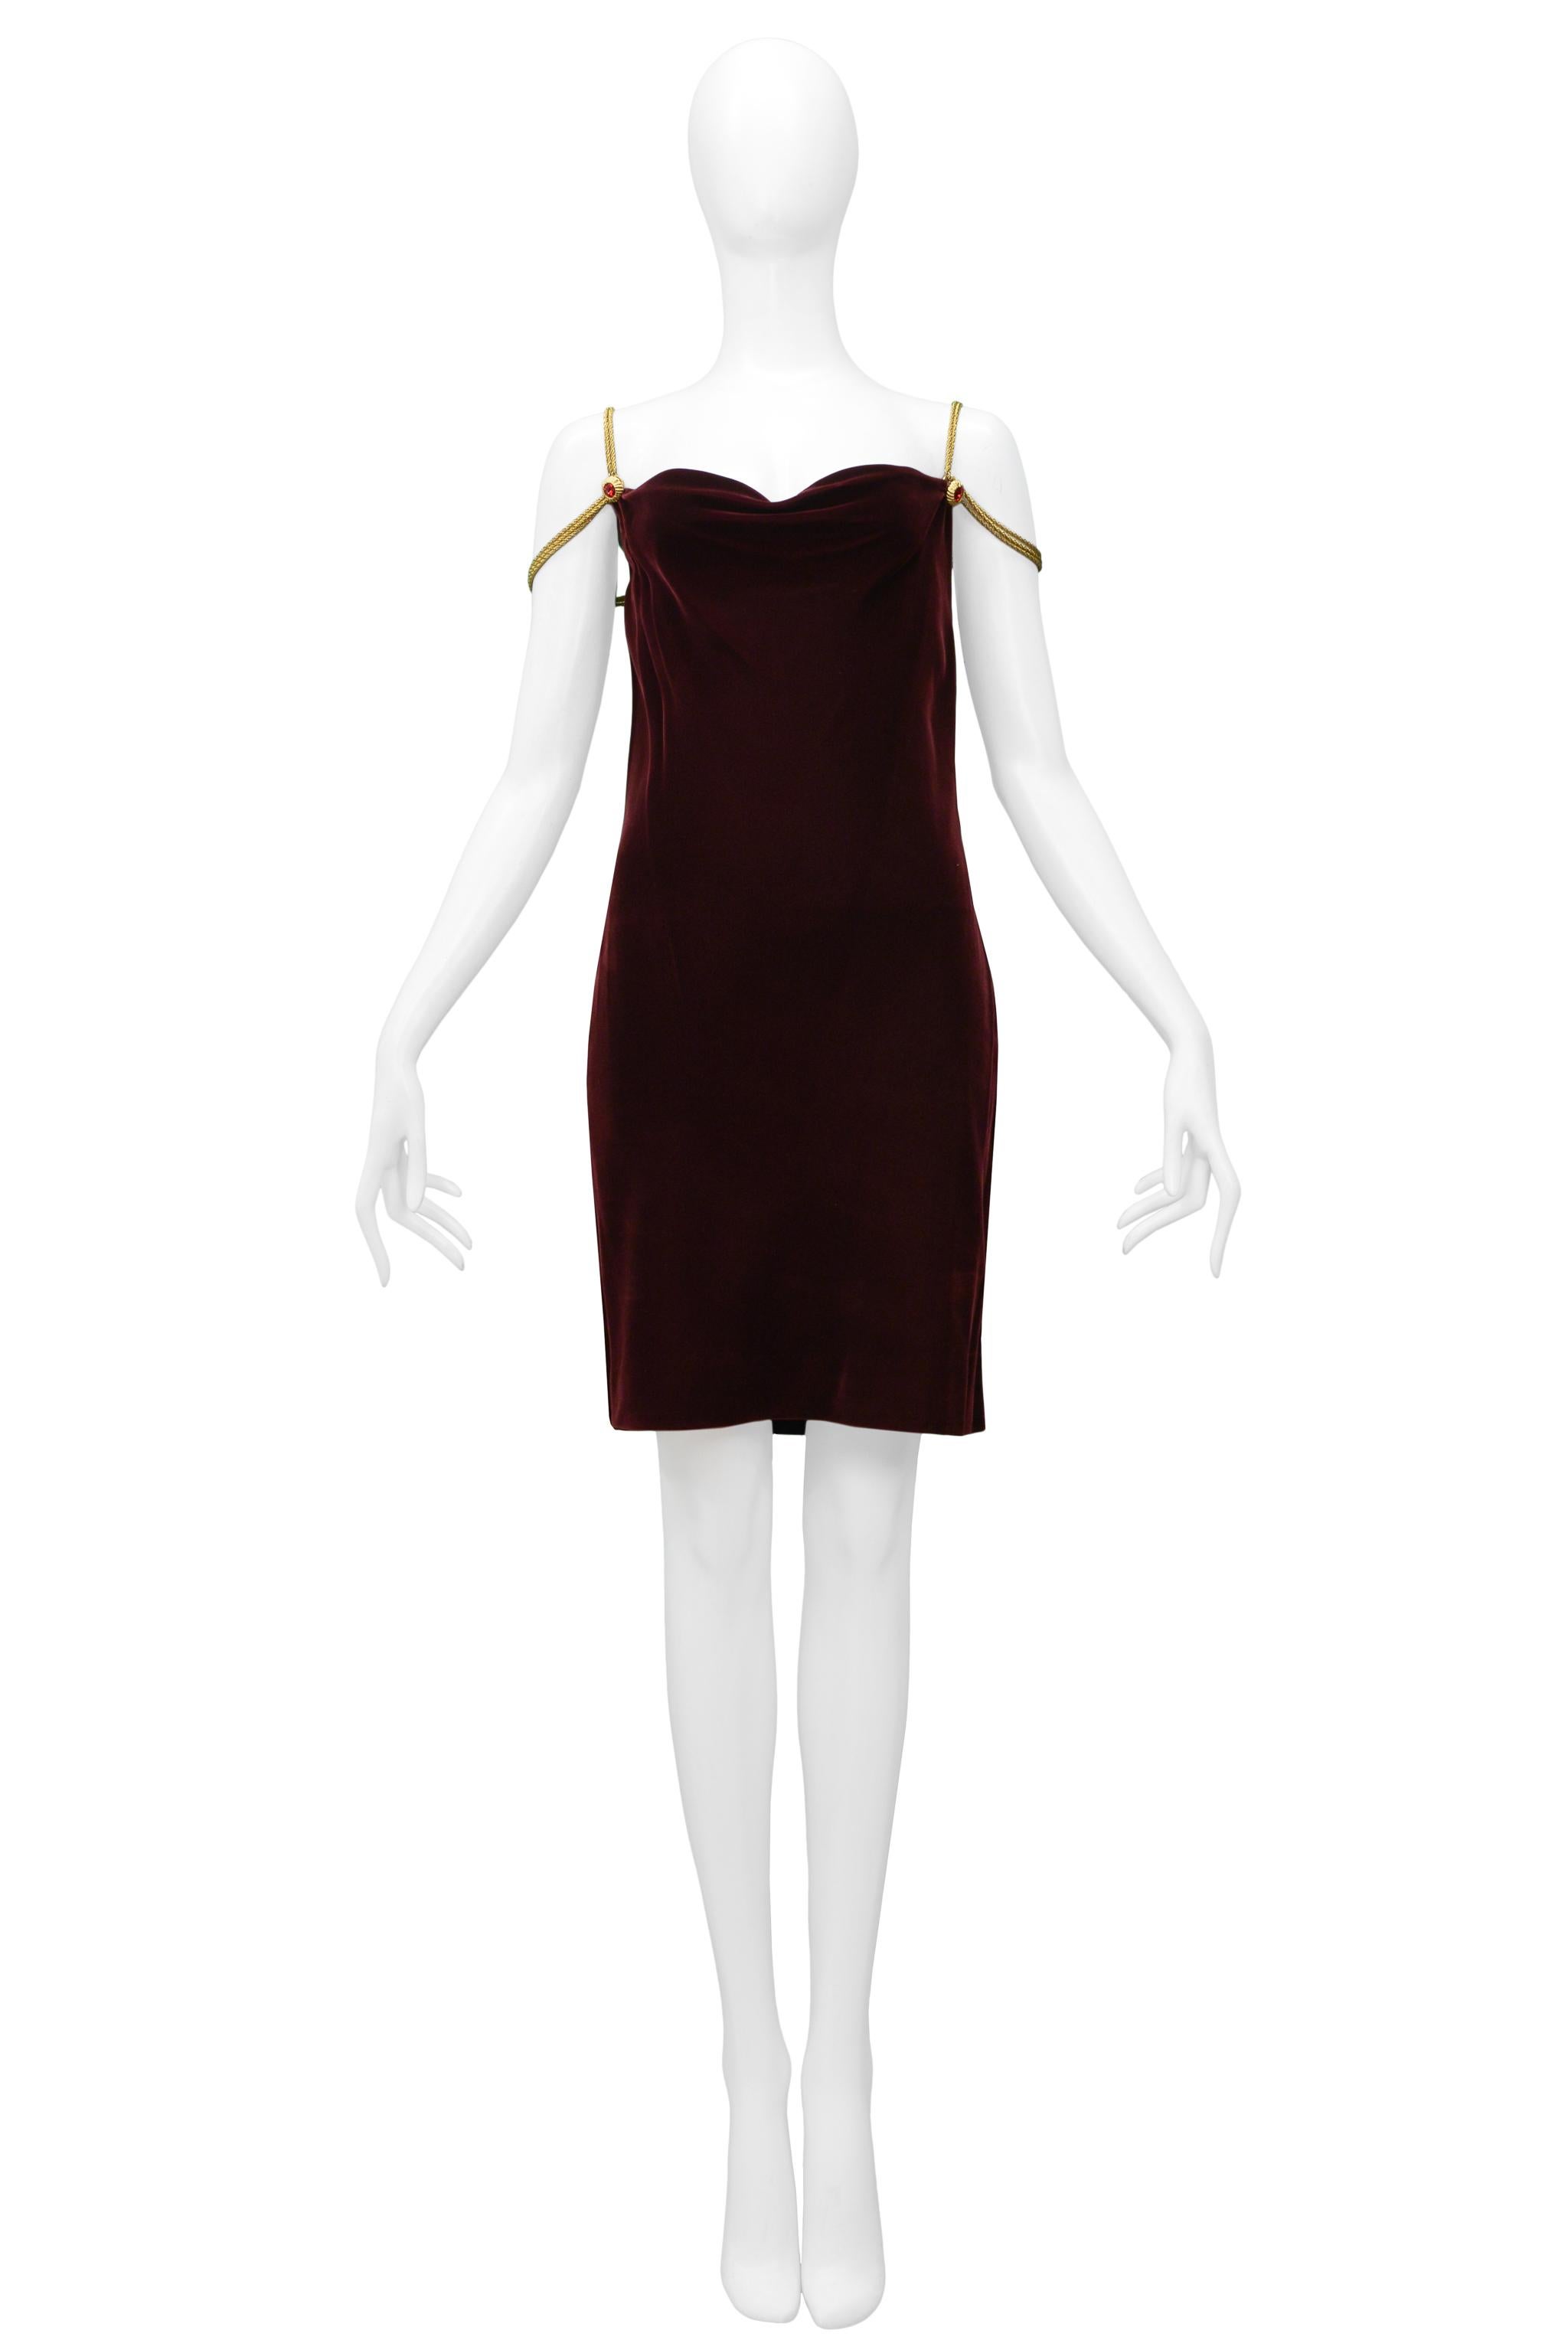 Resurrection Vintage is excited to offer a vintage Anne Klein burgundy velvet cocktail dress featuring an open front and back neckline, gold chain straps, and gold hardware with red gemstones, and mini length.

Anne Klein
Size Small
Velvet and Metal